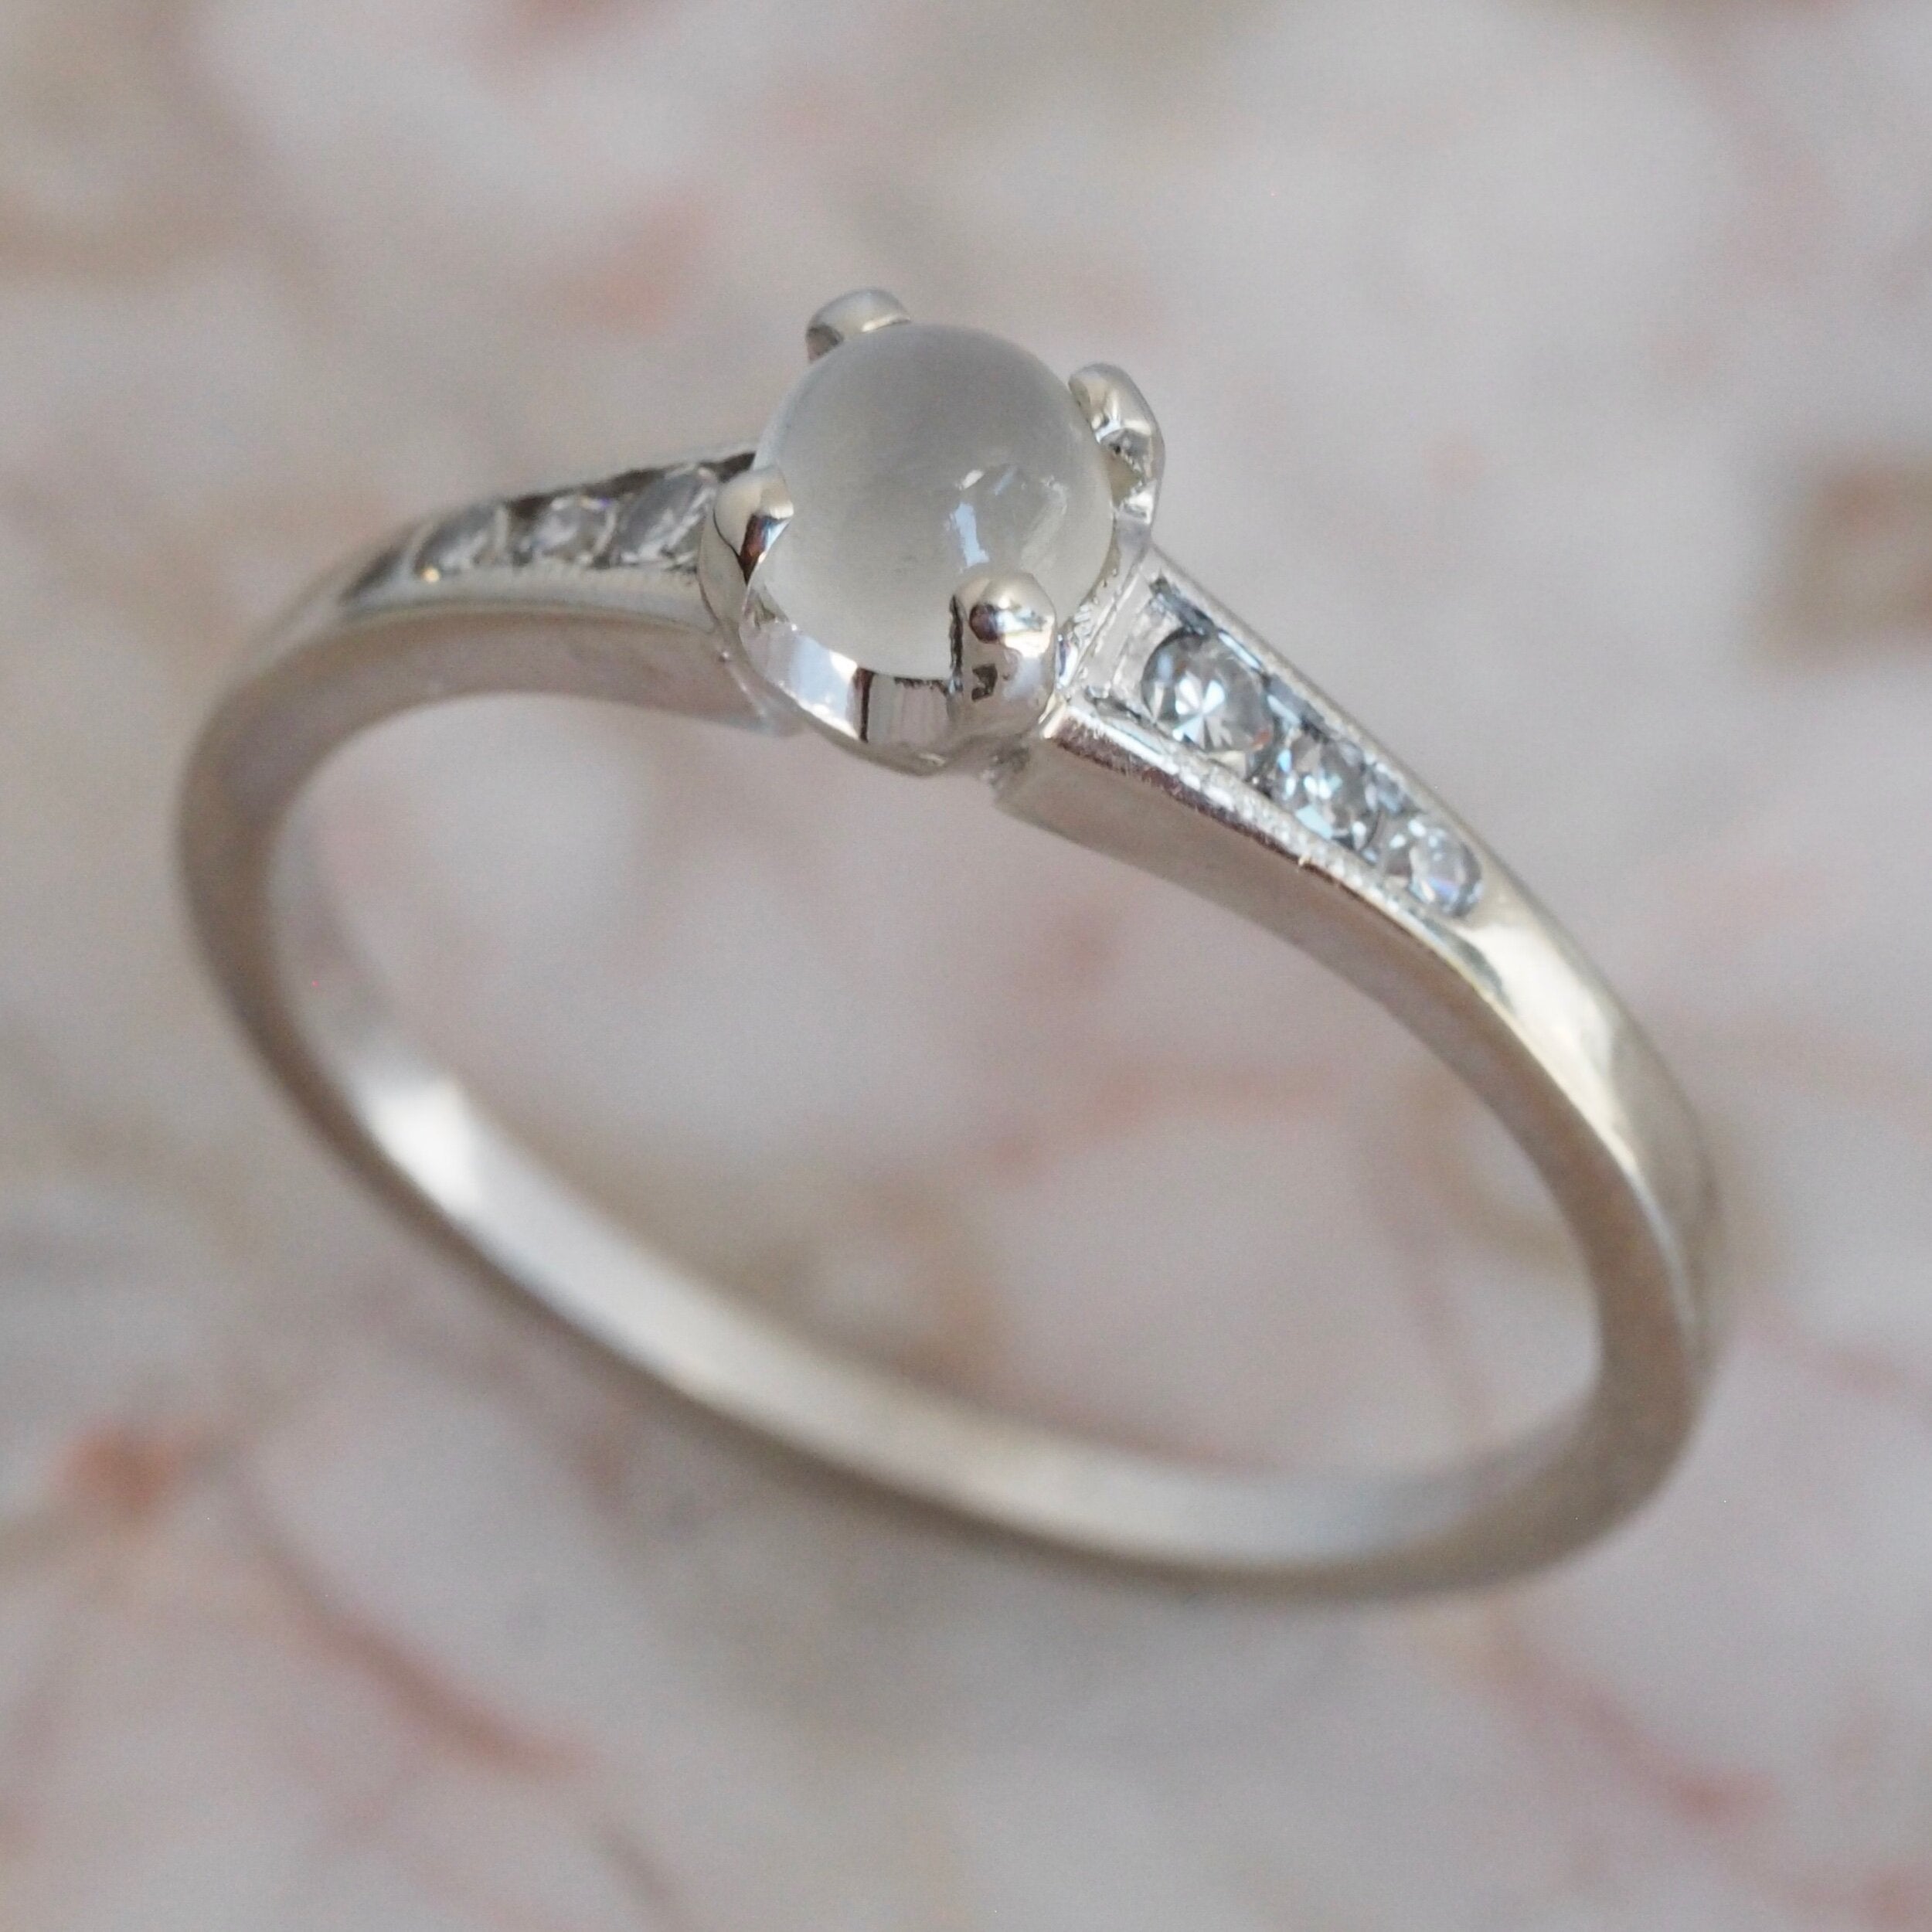 Midcentury 14k White Gold Moonstone and Diamond Solitaire Ring